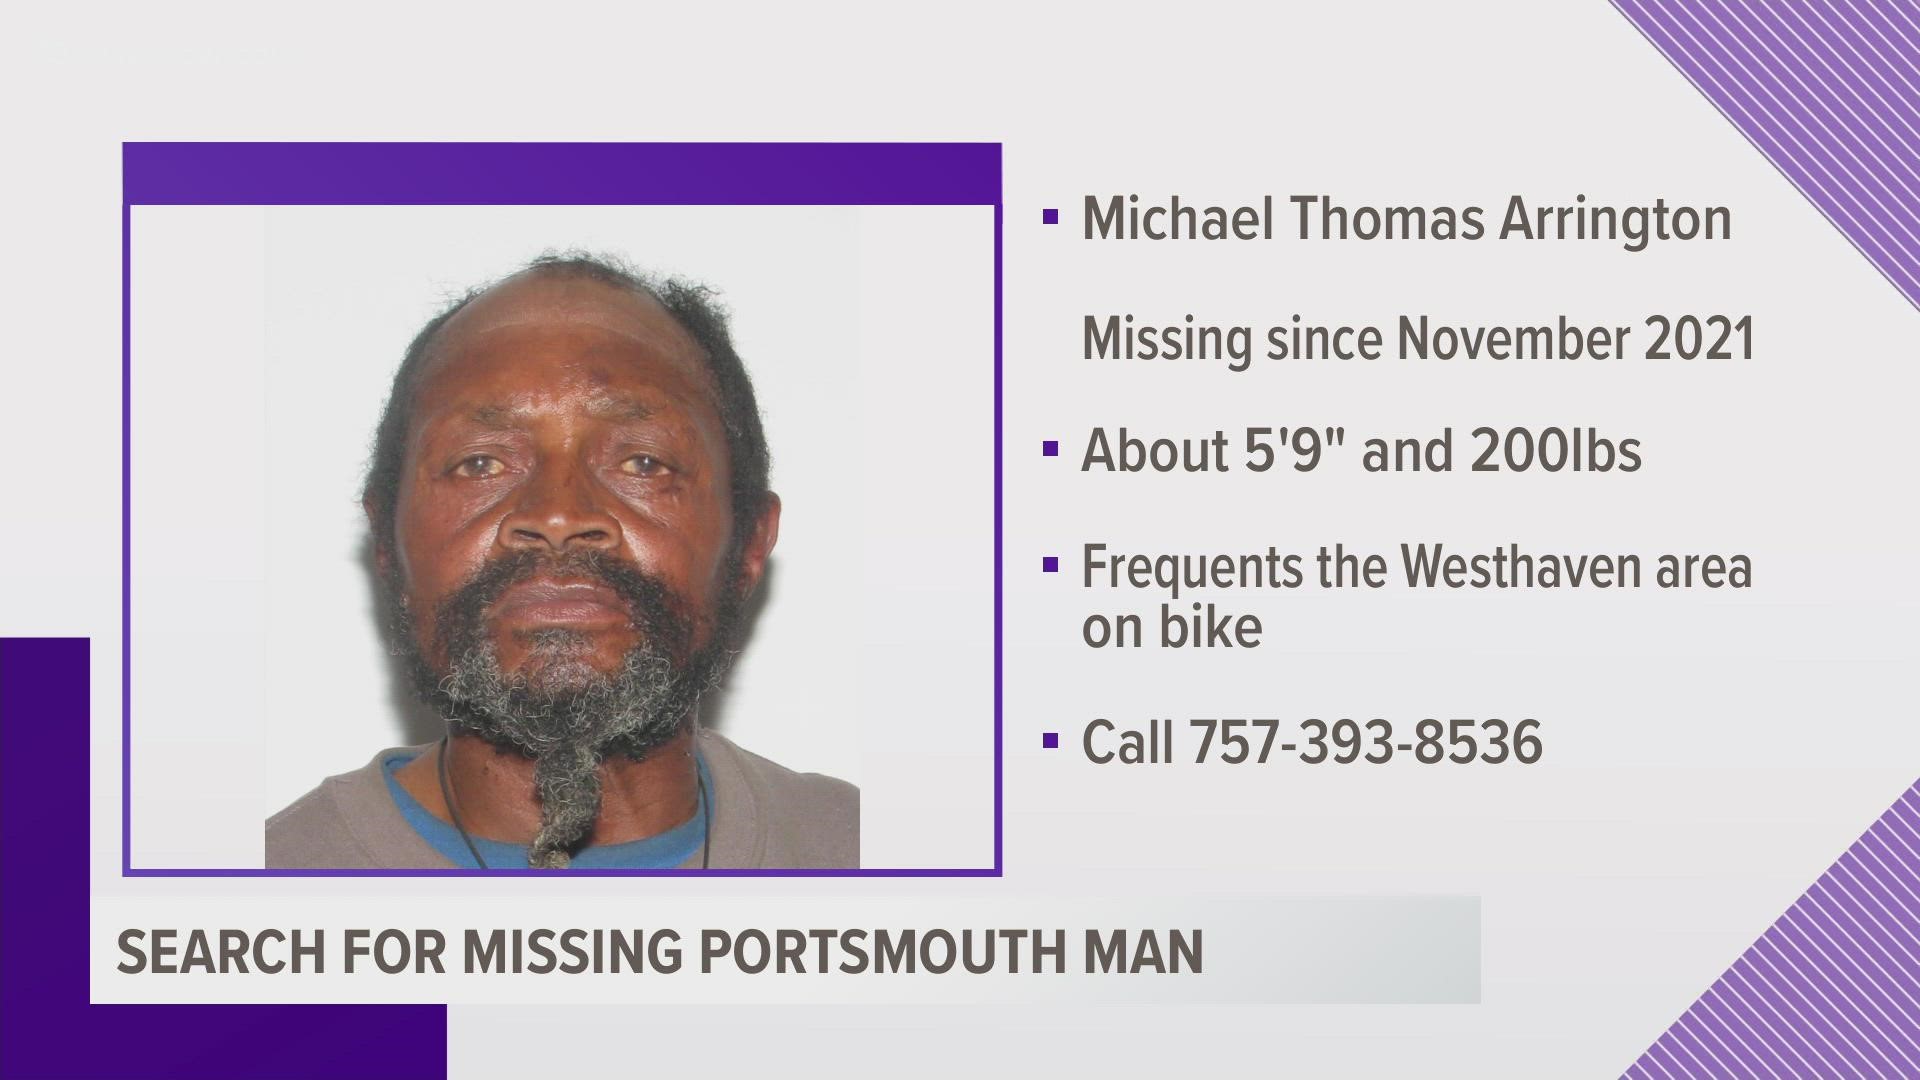 Michael Thomas Arrington was last seen by his family in November 2021, and has more recently not been in any contact with them.